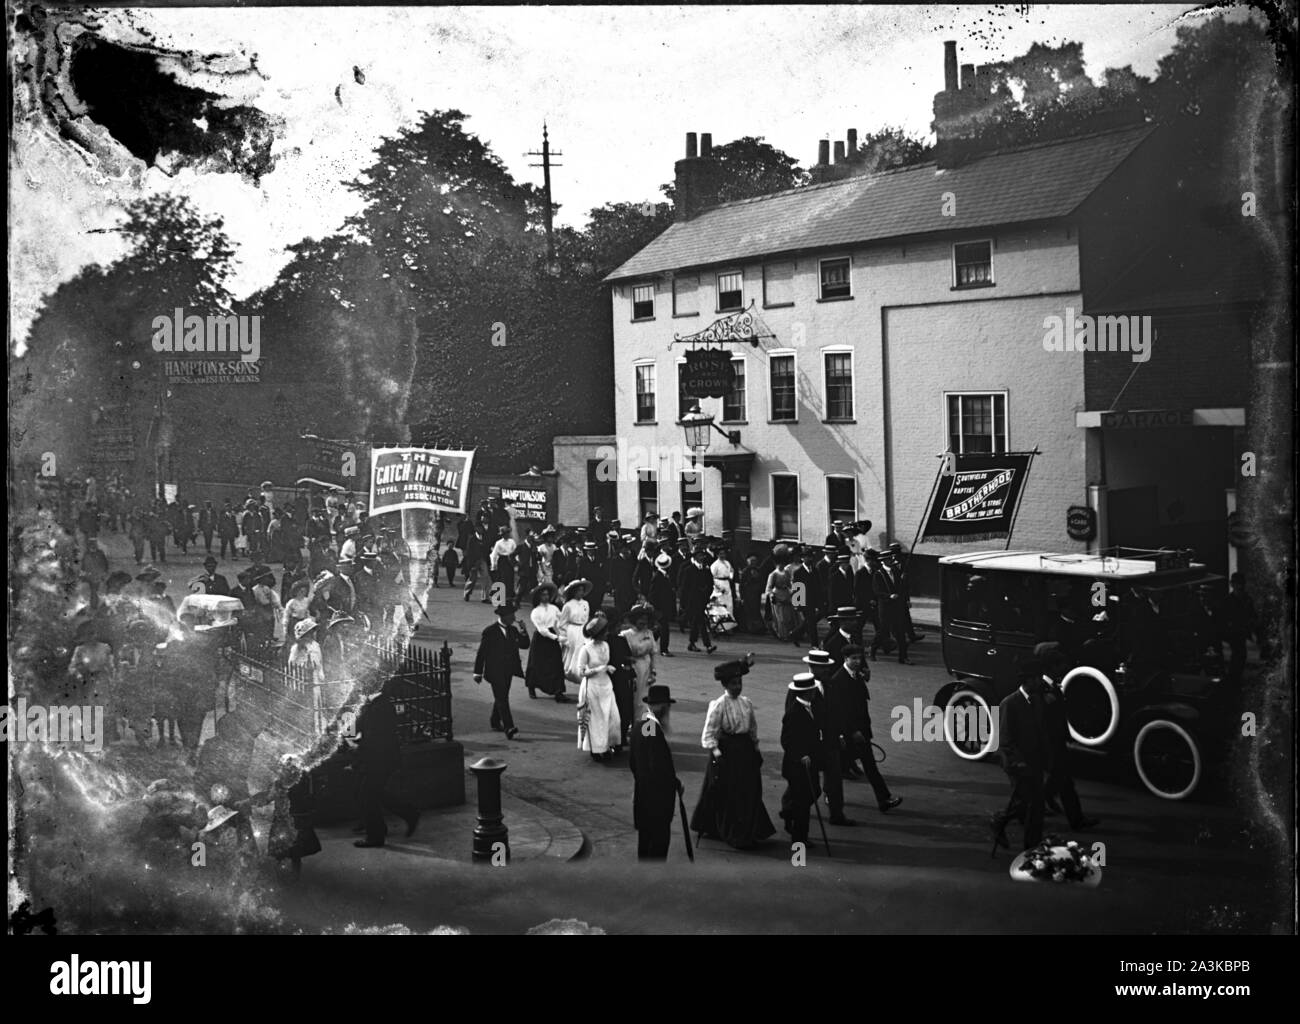 Unretouched original glass negative scan of Baptists and other similar groups including the Total Abstinence Association marching past the Rose & Crown pub on the High Street in Wimbledon c1907 Photo by Tony Henshaw Archive Stock Photo